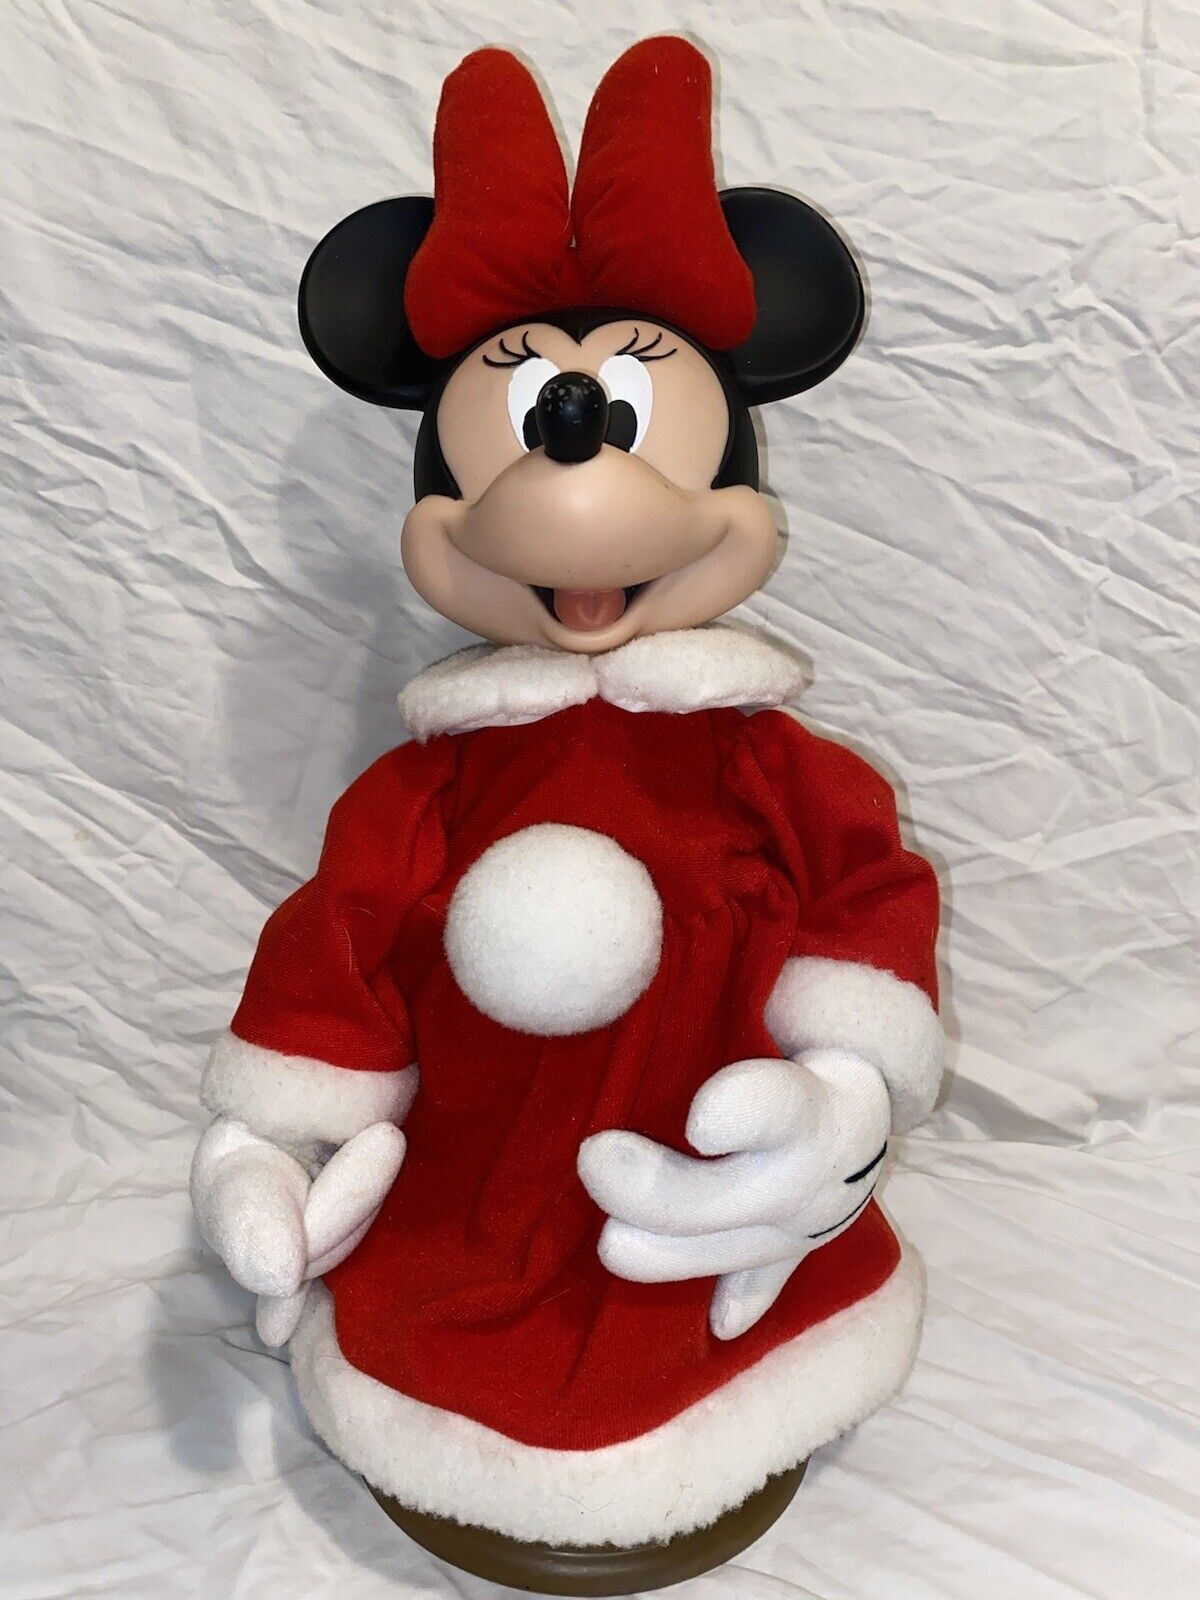 VTG SANTAS BEST Minnie Mouse 18 Inch ELECTRIC ANIMATED MOTIONETTE XMAS DISNEY